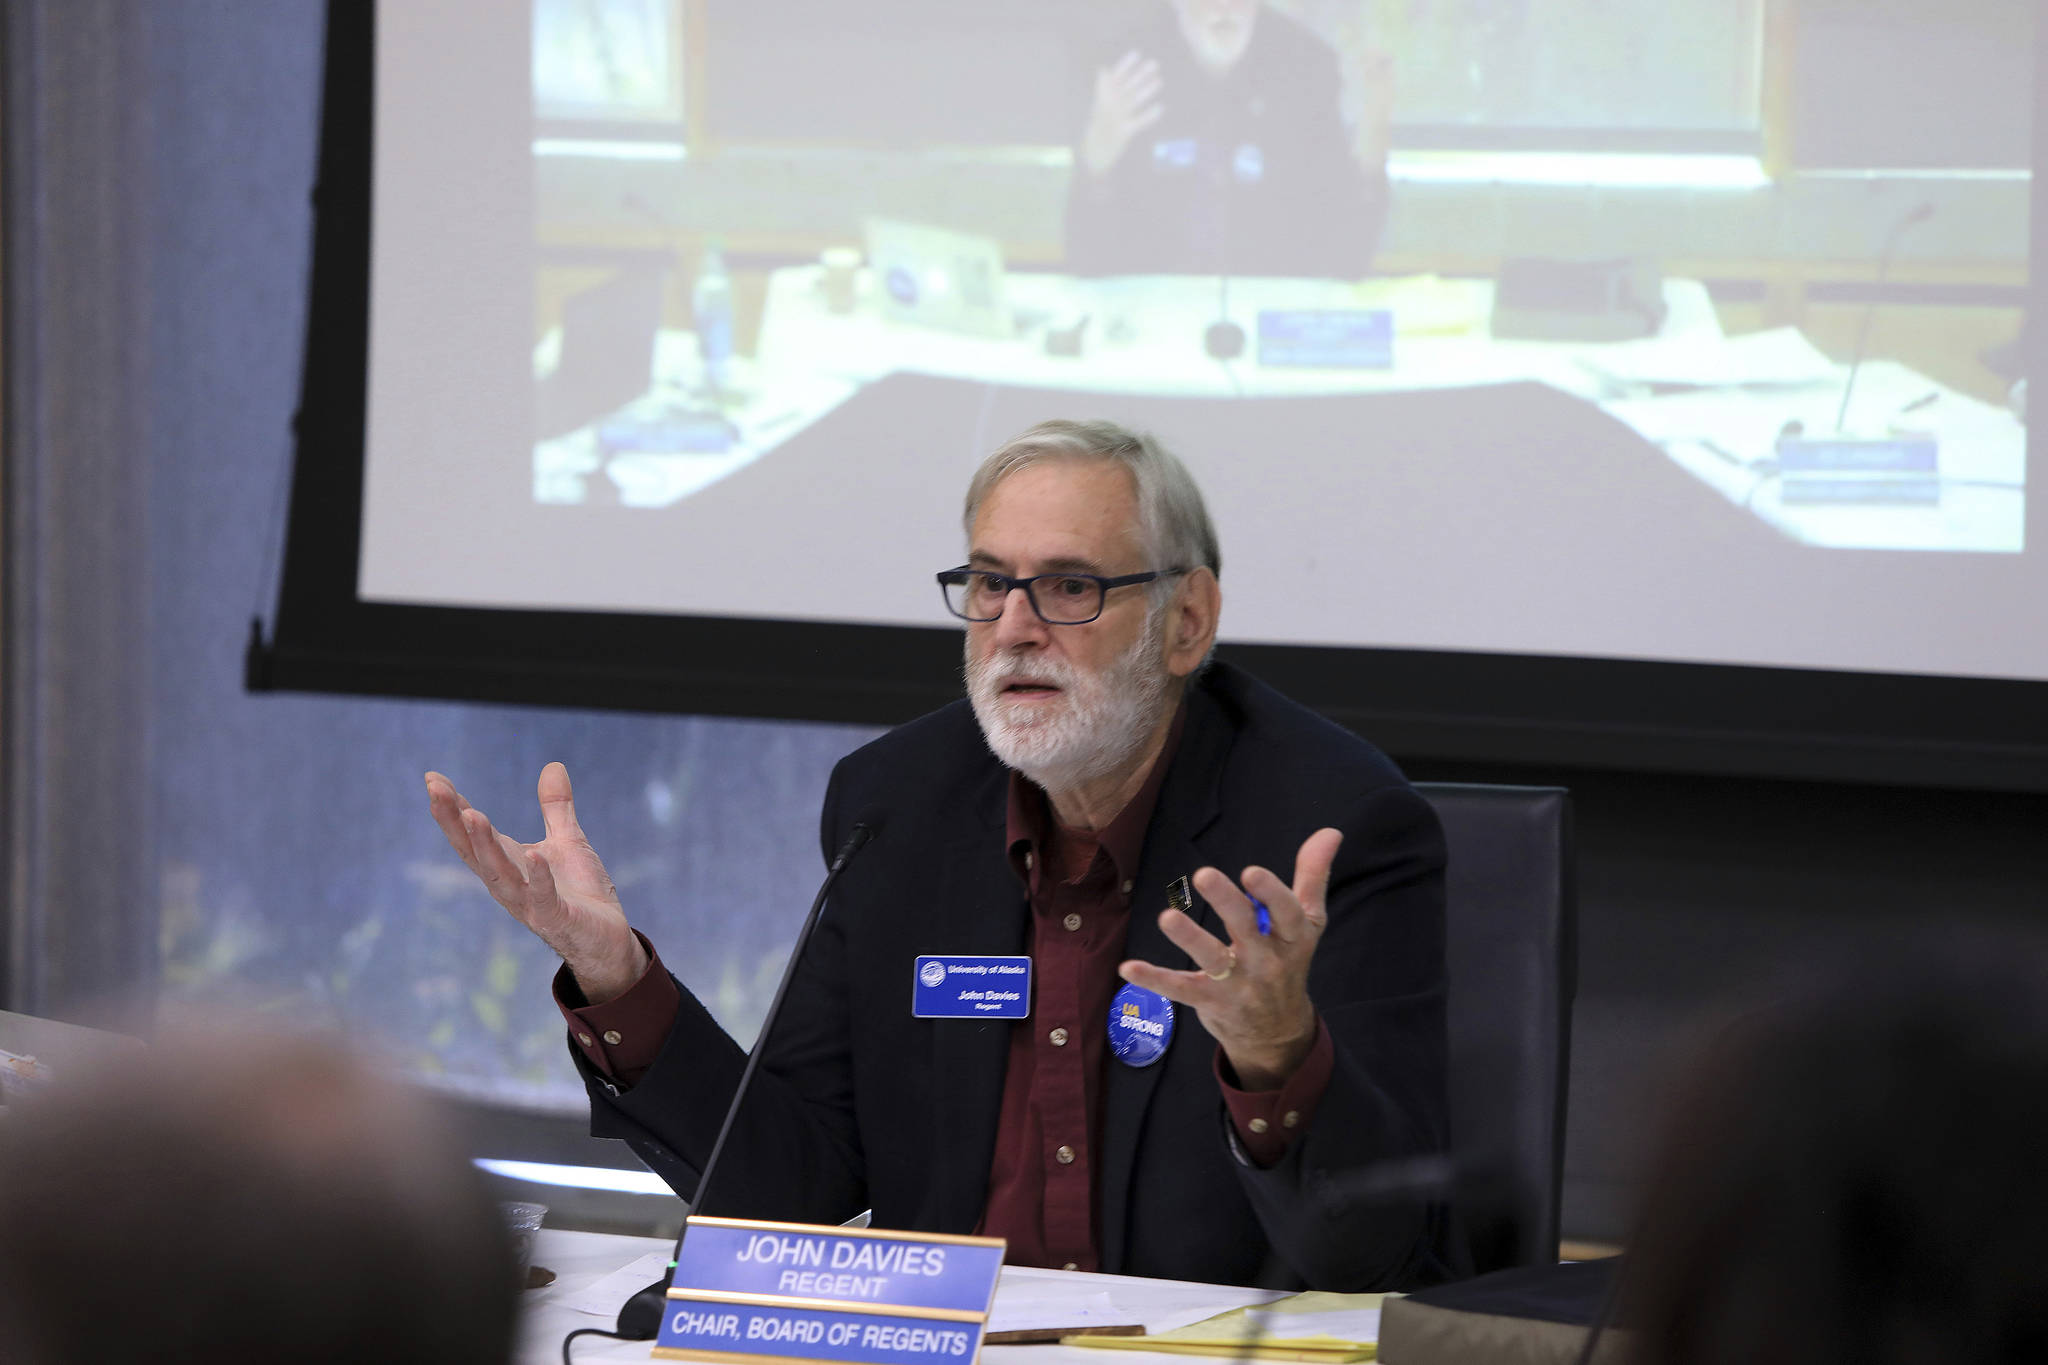 John Davies, chairman of the University of Alaska Board of Regents, speaks at a regents meeting, Tuesday, July 30, 2019, in Anchorage, Alaska. Facing severe budget cuts, regents voted 8-3 to authorize UA President Jim Johnsen to immediately reduce administrative costs and prepare a plan for a transition from three accredited institutions to one. (AP Photo/Dan Joling)